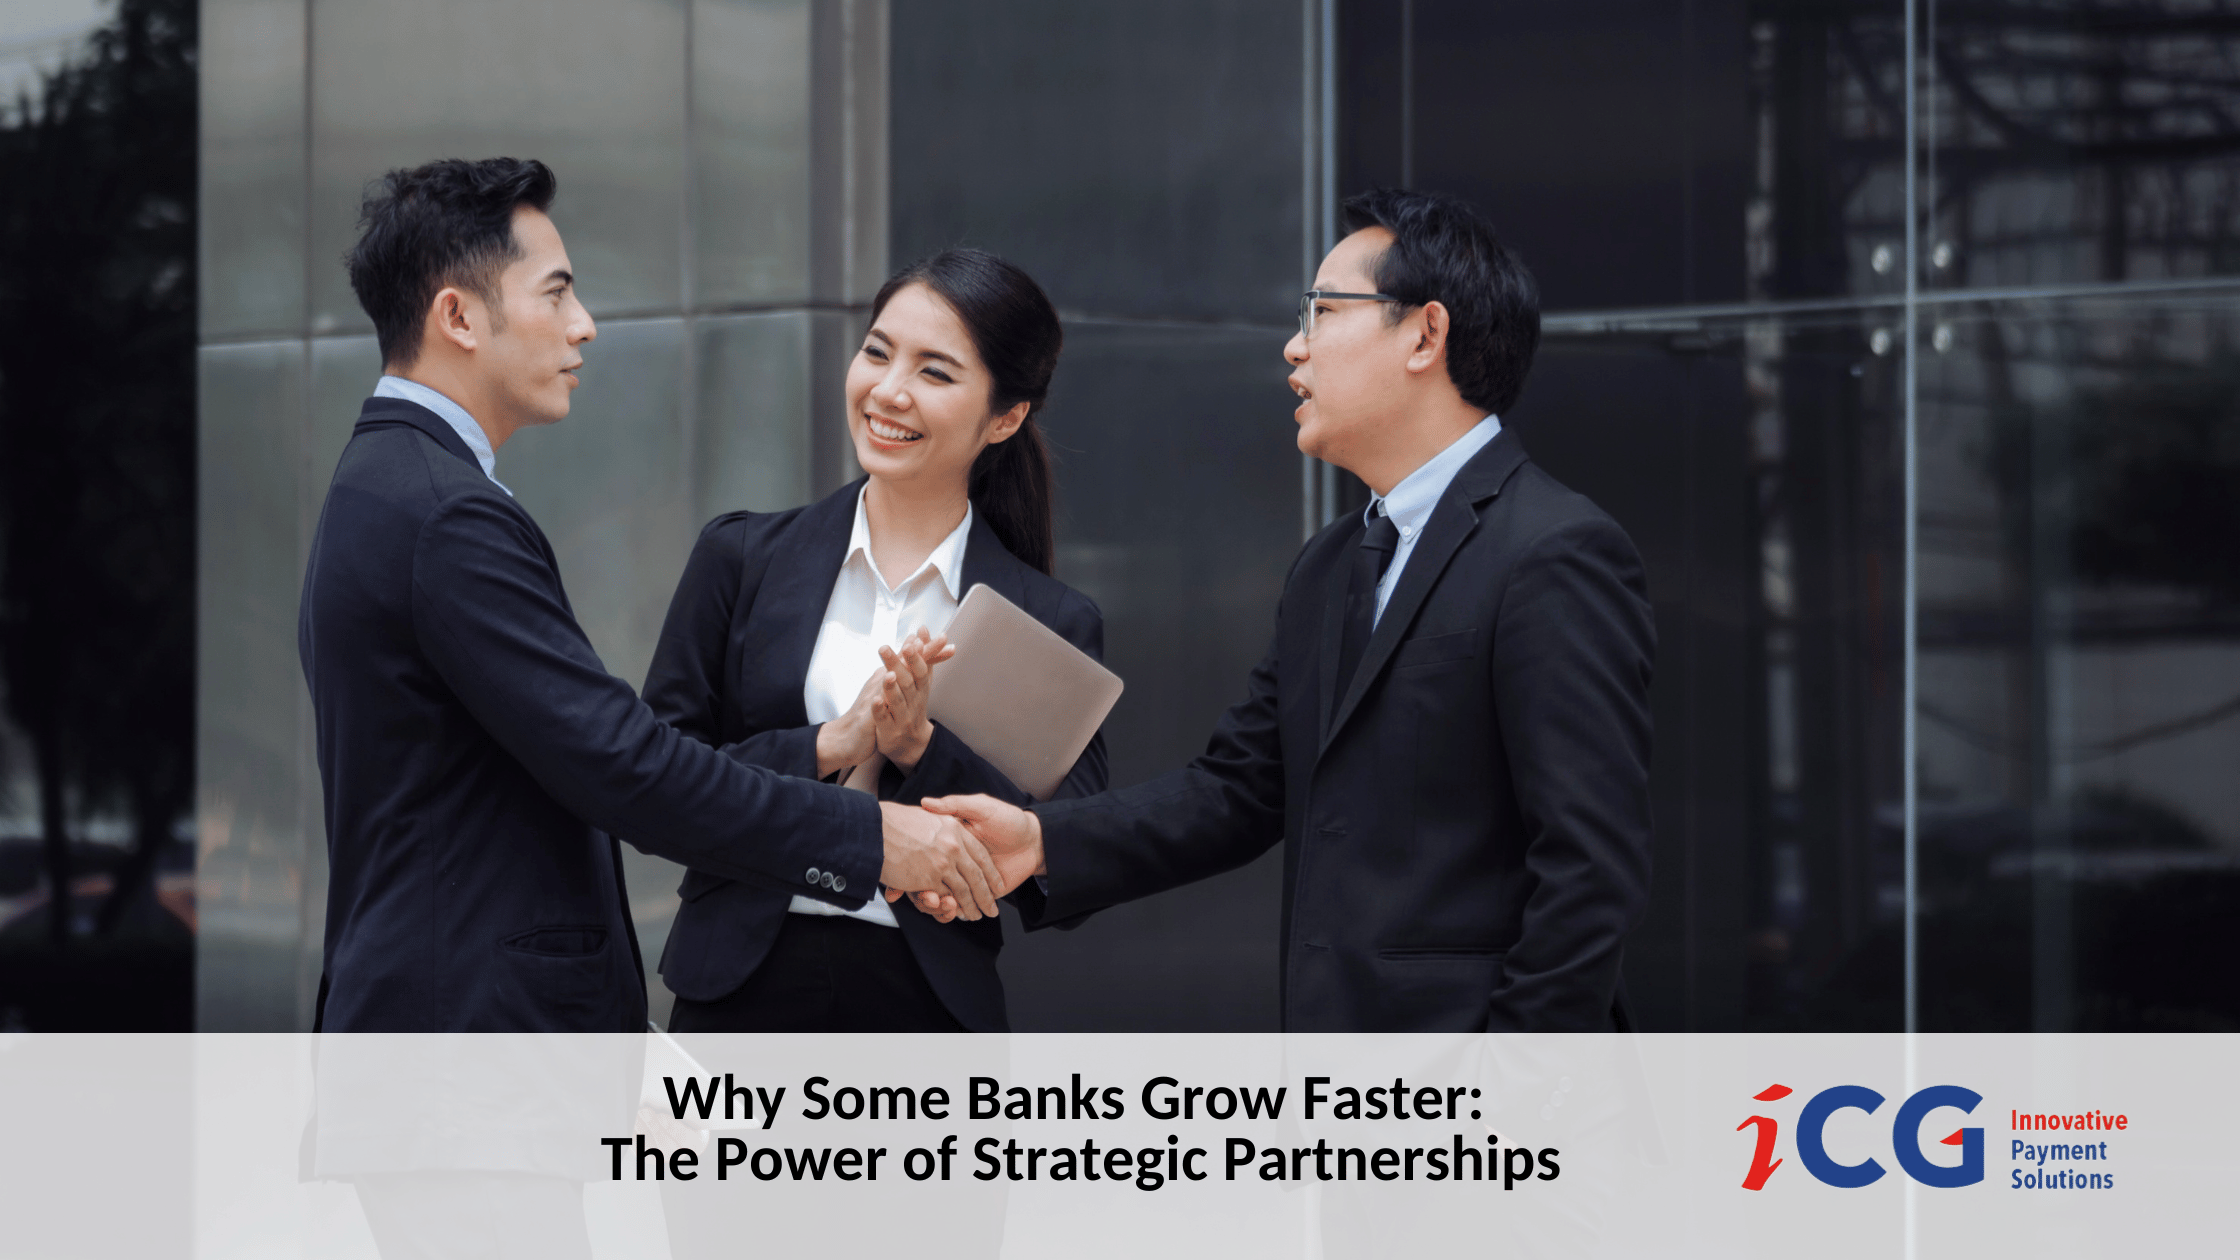 Why Some Banks Grow Faster: The Power of Strategic Partnerships